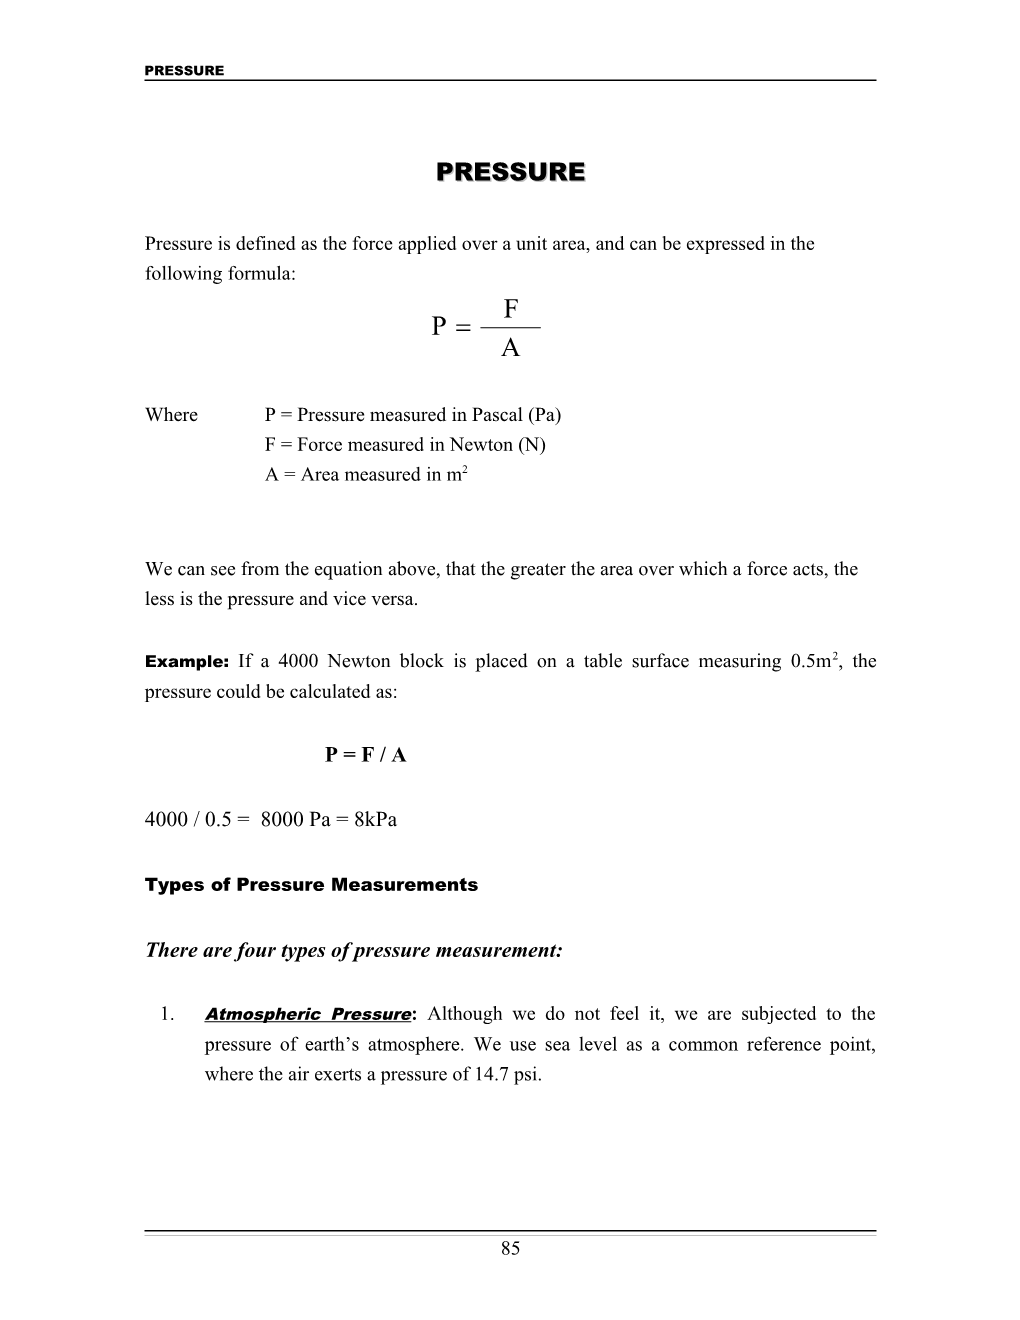 Where P = Pressure Measured in Pascal (Pa)